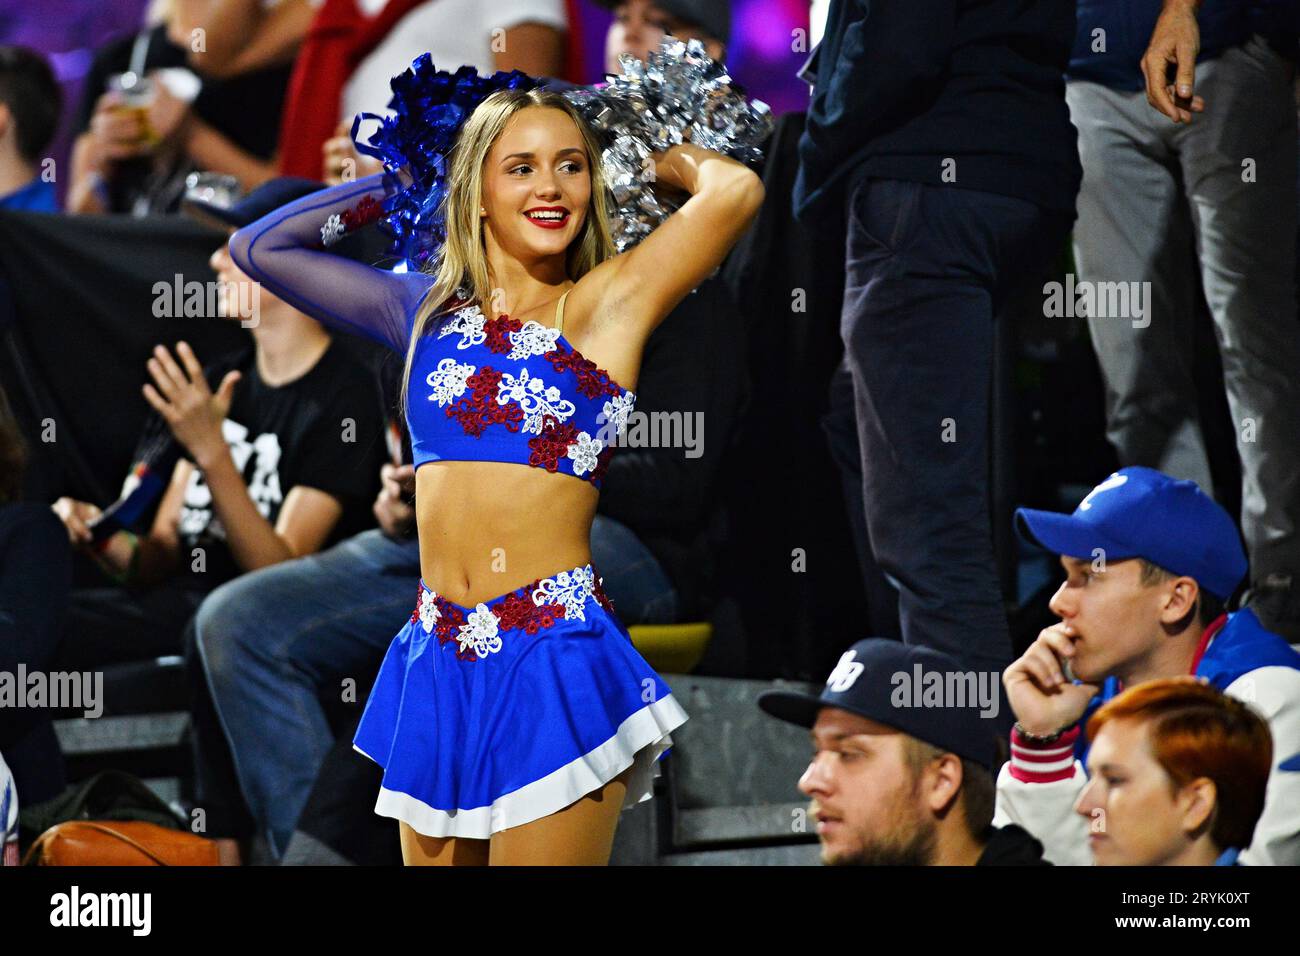 Brno, Czech Republic. 01st Oct, 2023. A cheerleader in action during the European Baseball Championship final, Spain vs Britain, at the YD Baseball Arena Brno, Czech Republic, on October 1, 2023. Credit: Patrik Uhlir/CTK Photo/Alamy Live News Stock Photo